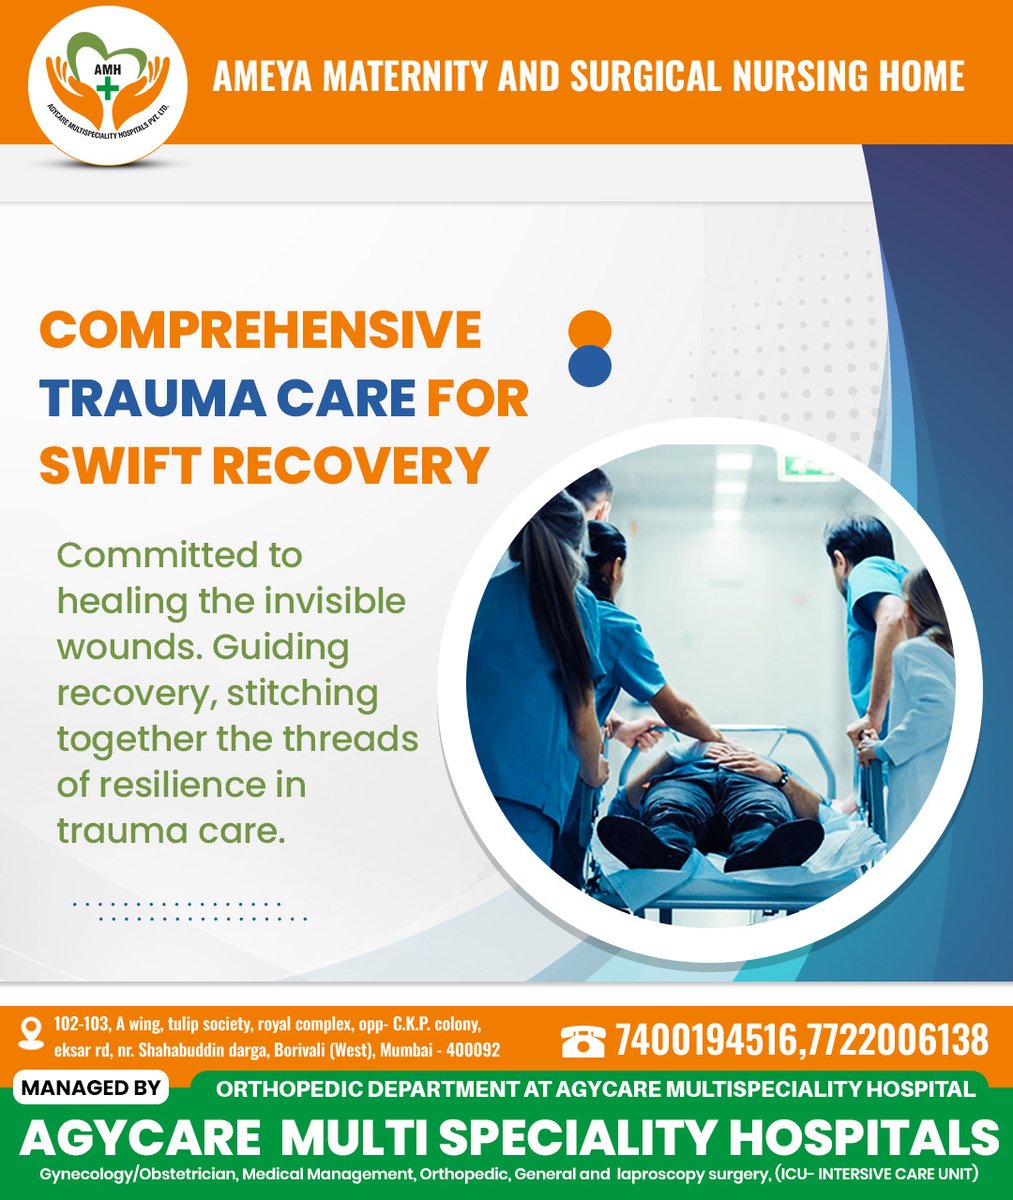 Expert trauma care for severe injuries caused by accidents, falls, violence, and trauma events.

For more enquiry 074001 94516, 7722006138

#agycaremultispecialityhospital #agycare #hospital #HealingJourneys #ResilienceRising #TraumaCareHeroes #HopeInRecovery